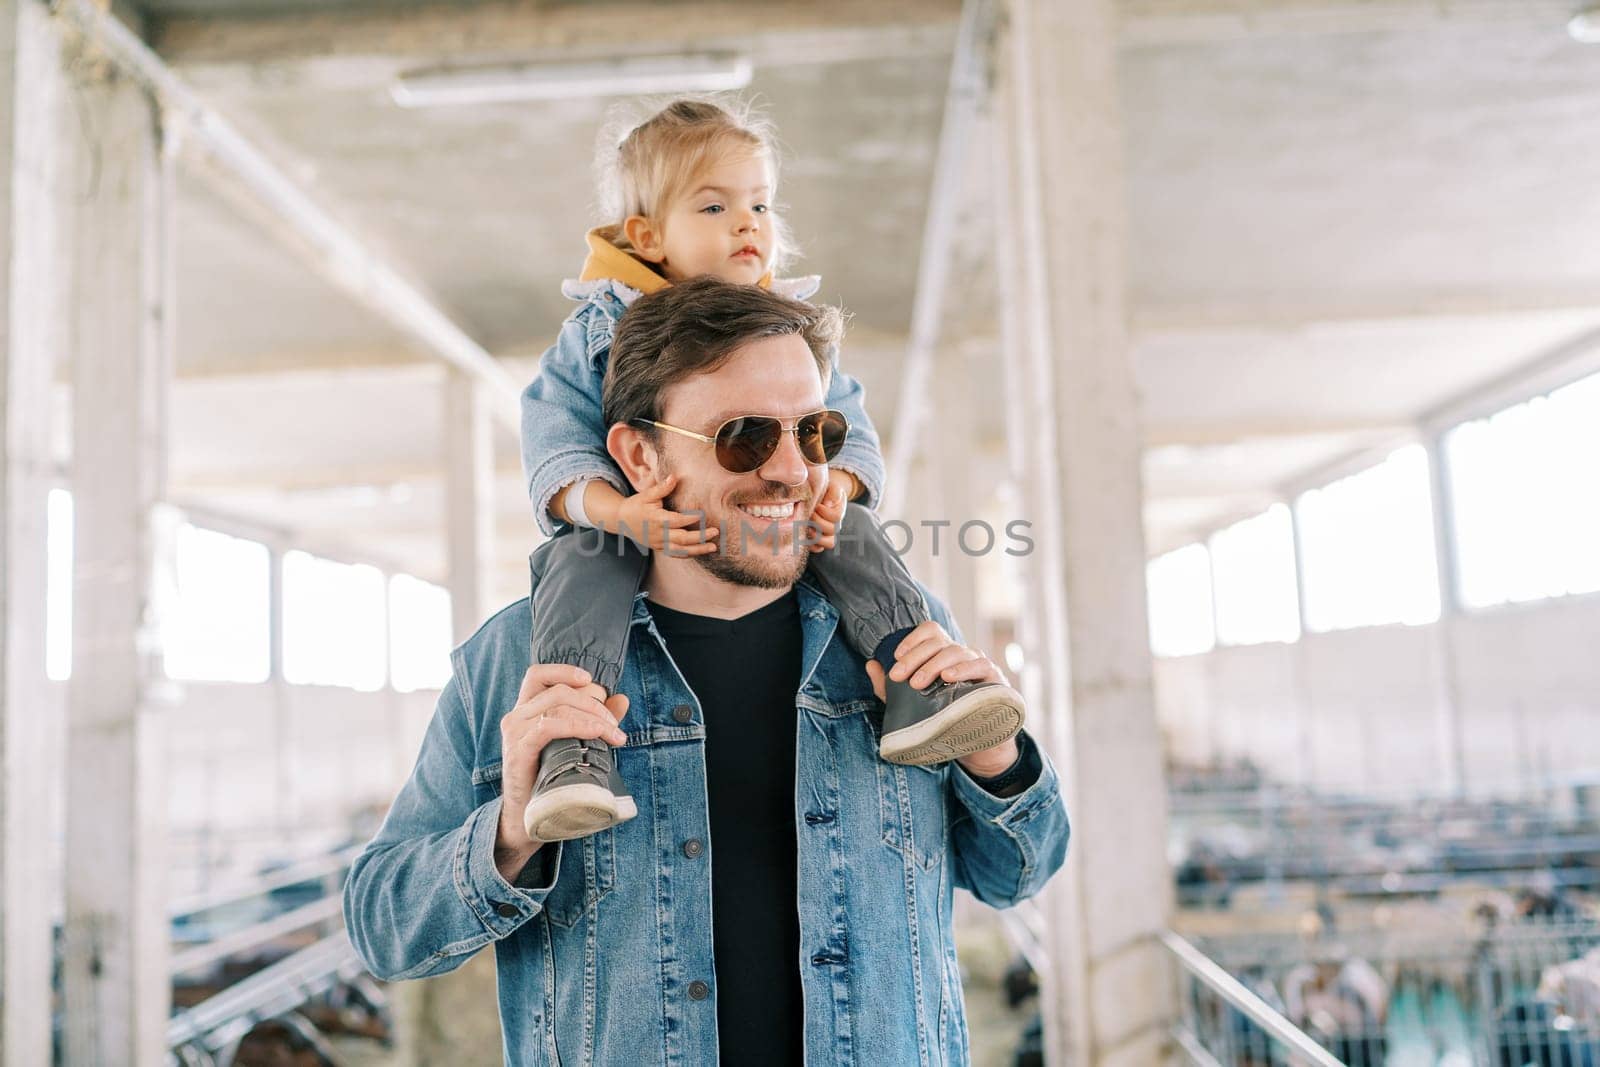 Smiling dad with a little girl on his shoulders walks around the farm and looks at the goats. High quality photo